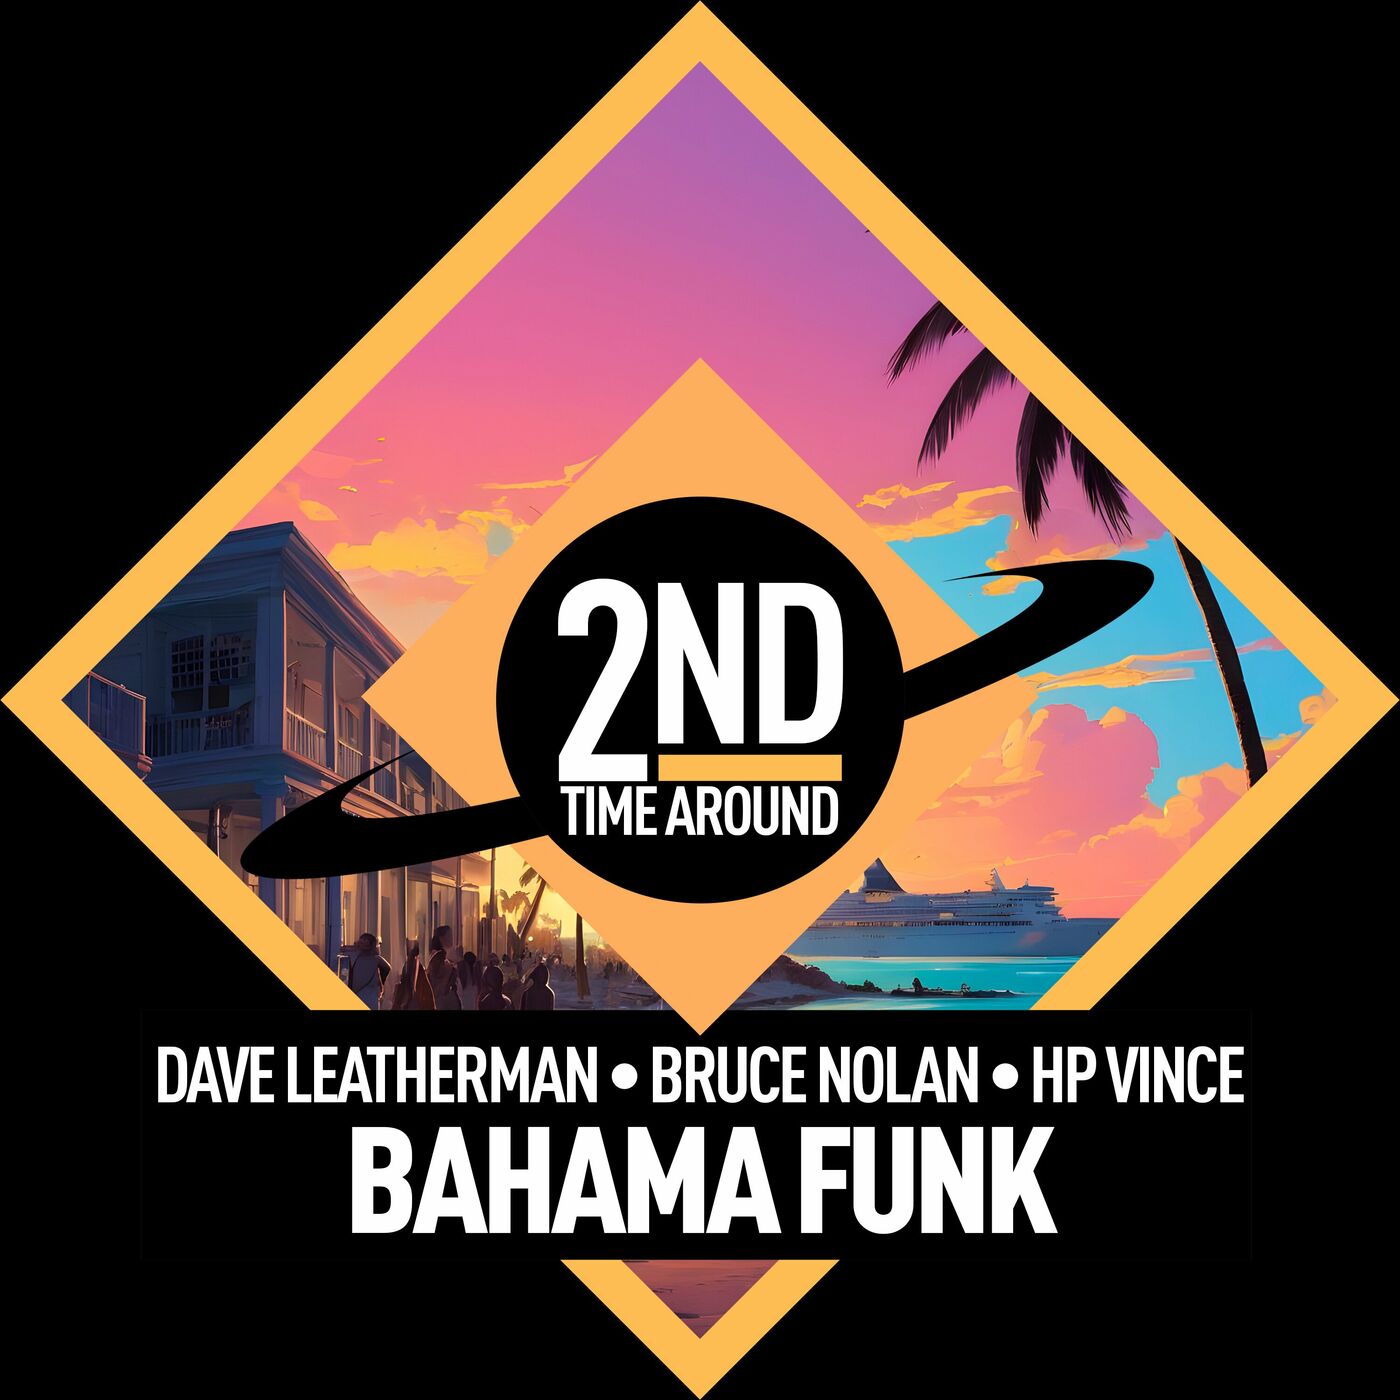 Dave Leatherman, HP Vince, Bruce Nolan - Bahama Funk on 2nd Time Around